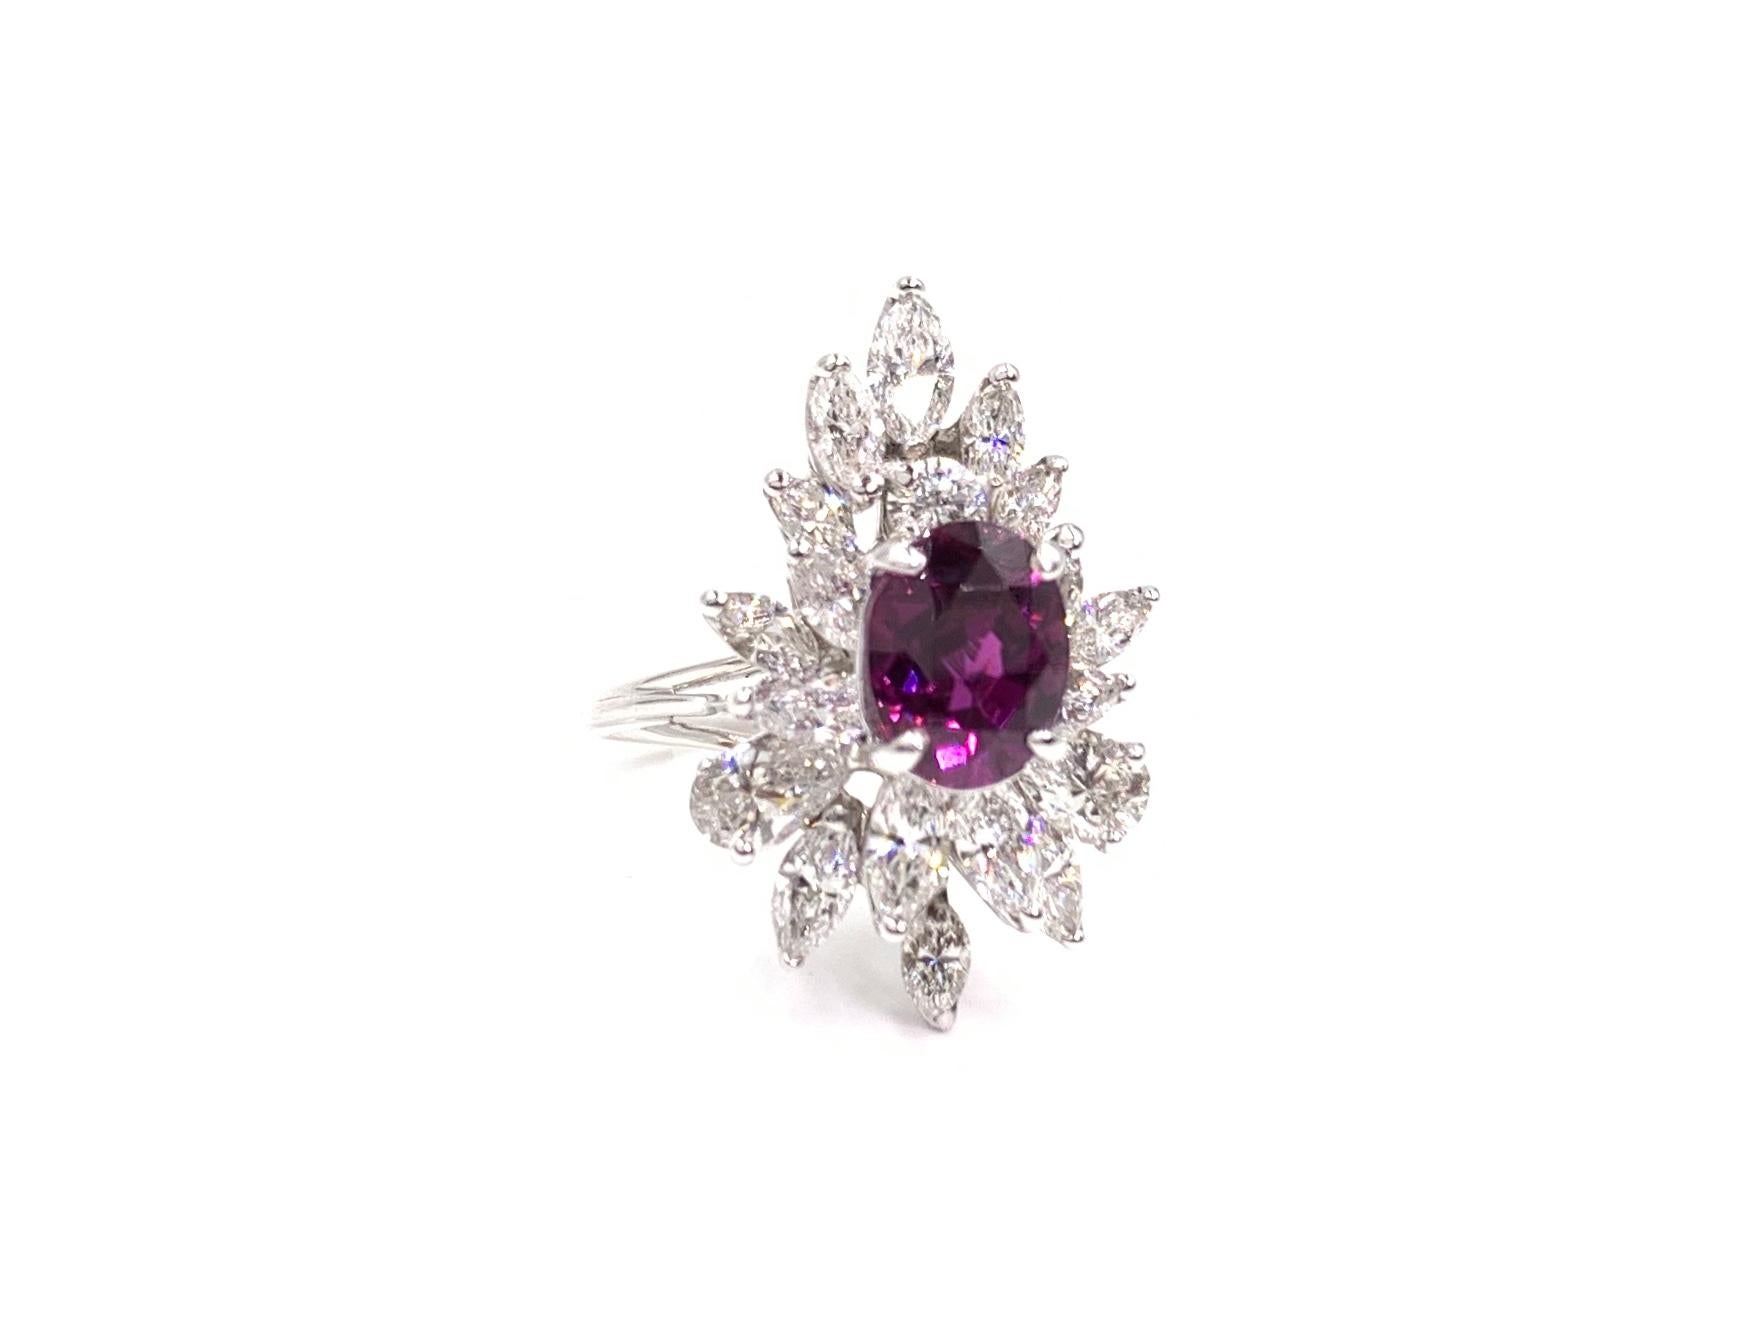 A truly exquisite vintage find. This 14 karat white gold cocktail ring features a vibrant 3.14 carat oval merlot colored ruby surrounded by approximately 4.06 carats of high quality marquise, pear and round diamonds. Diamonds have a generous amount